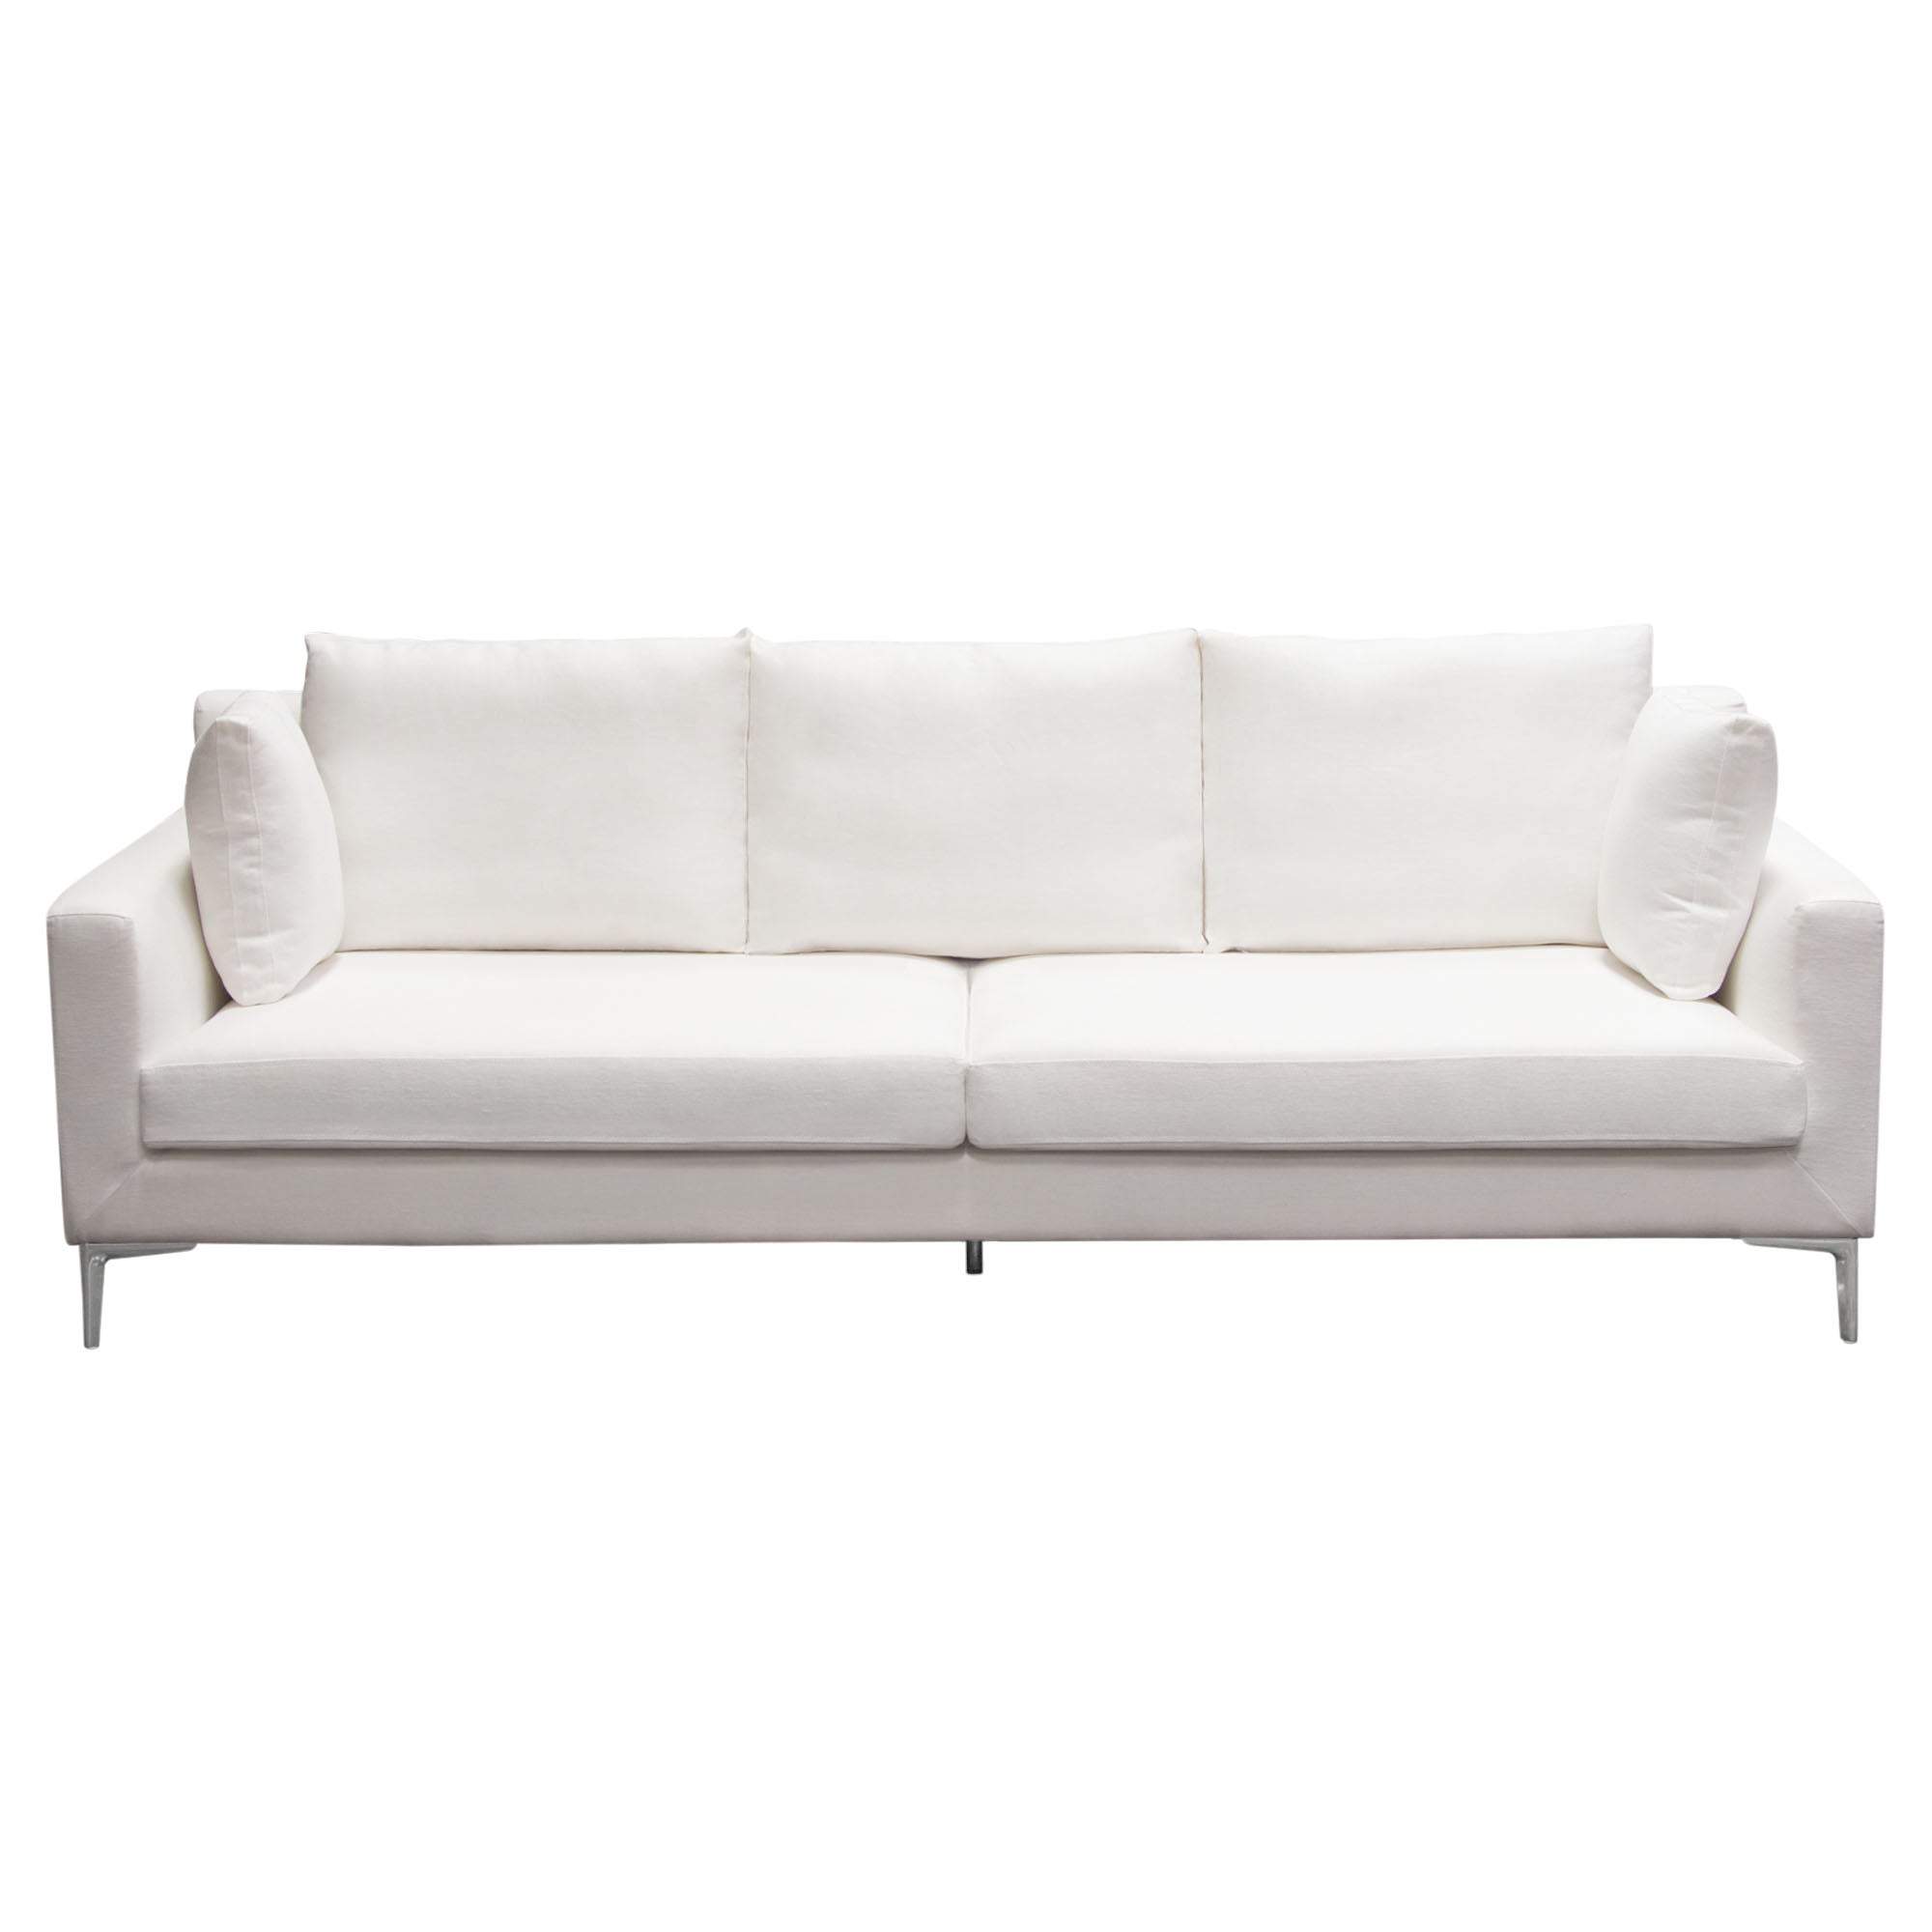 Diamond Sofa Seattle Loose Back Sofa in White Linen with Polished Silver Metal Leg